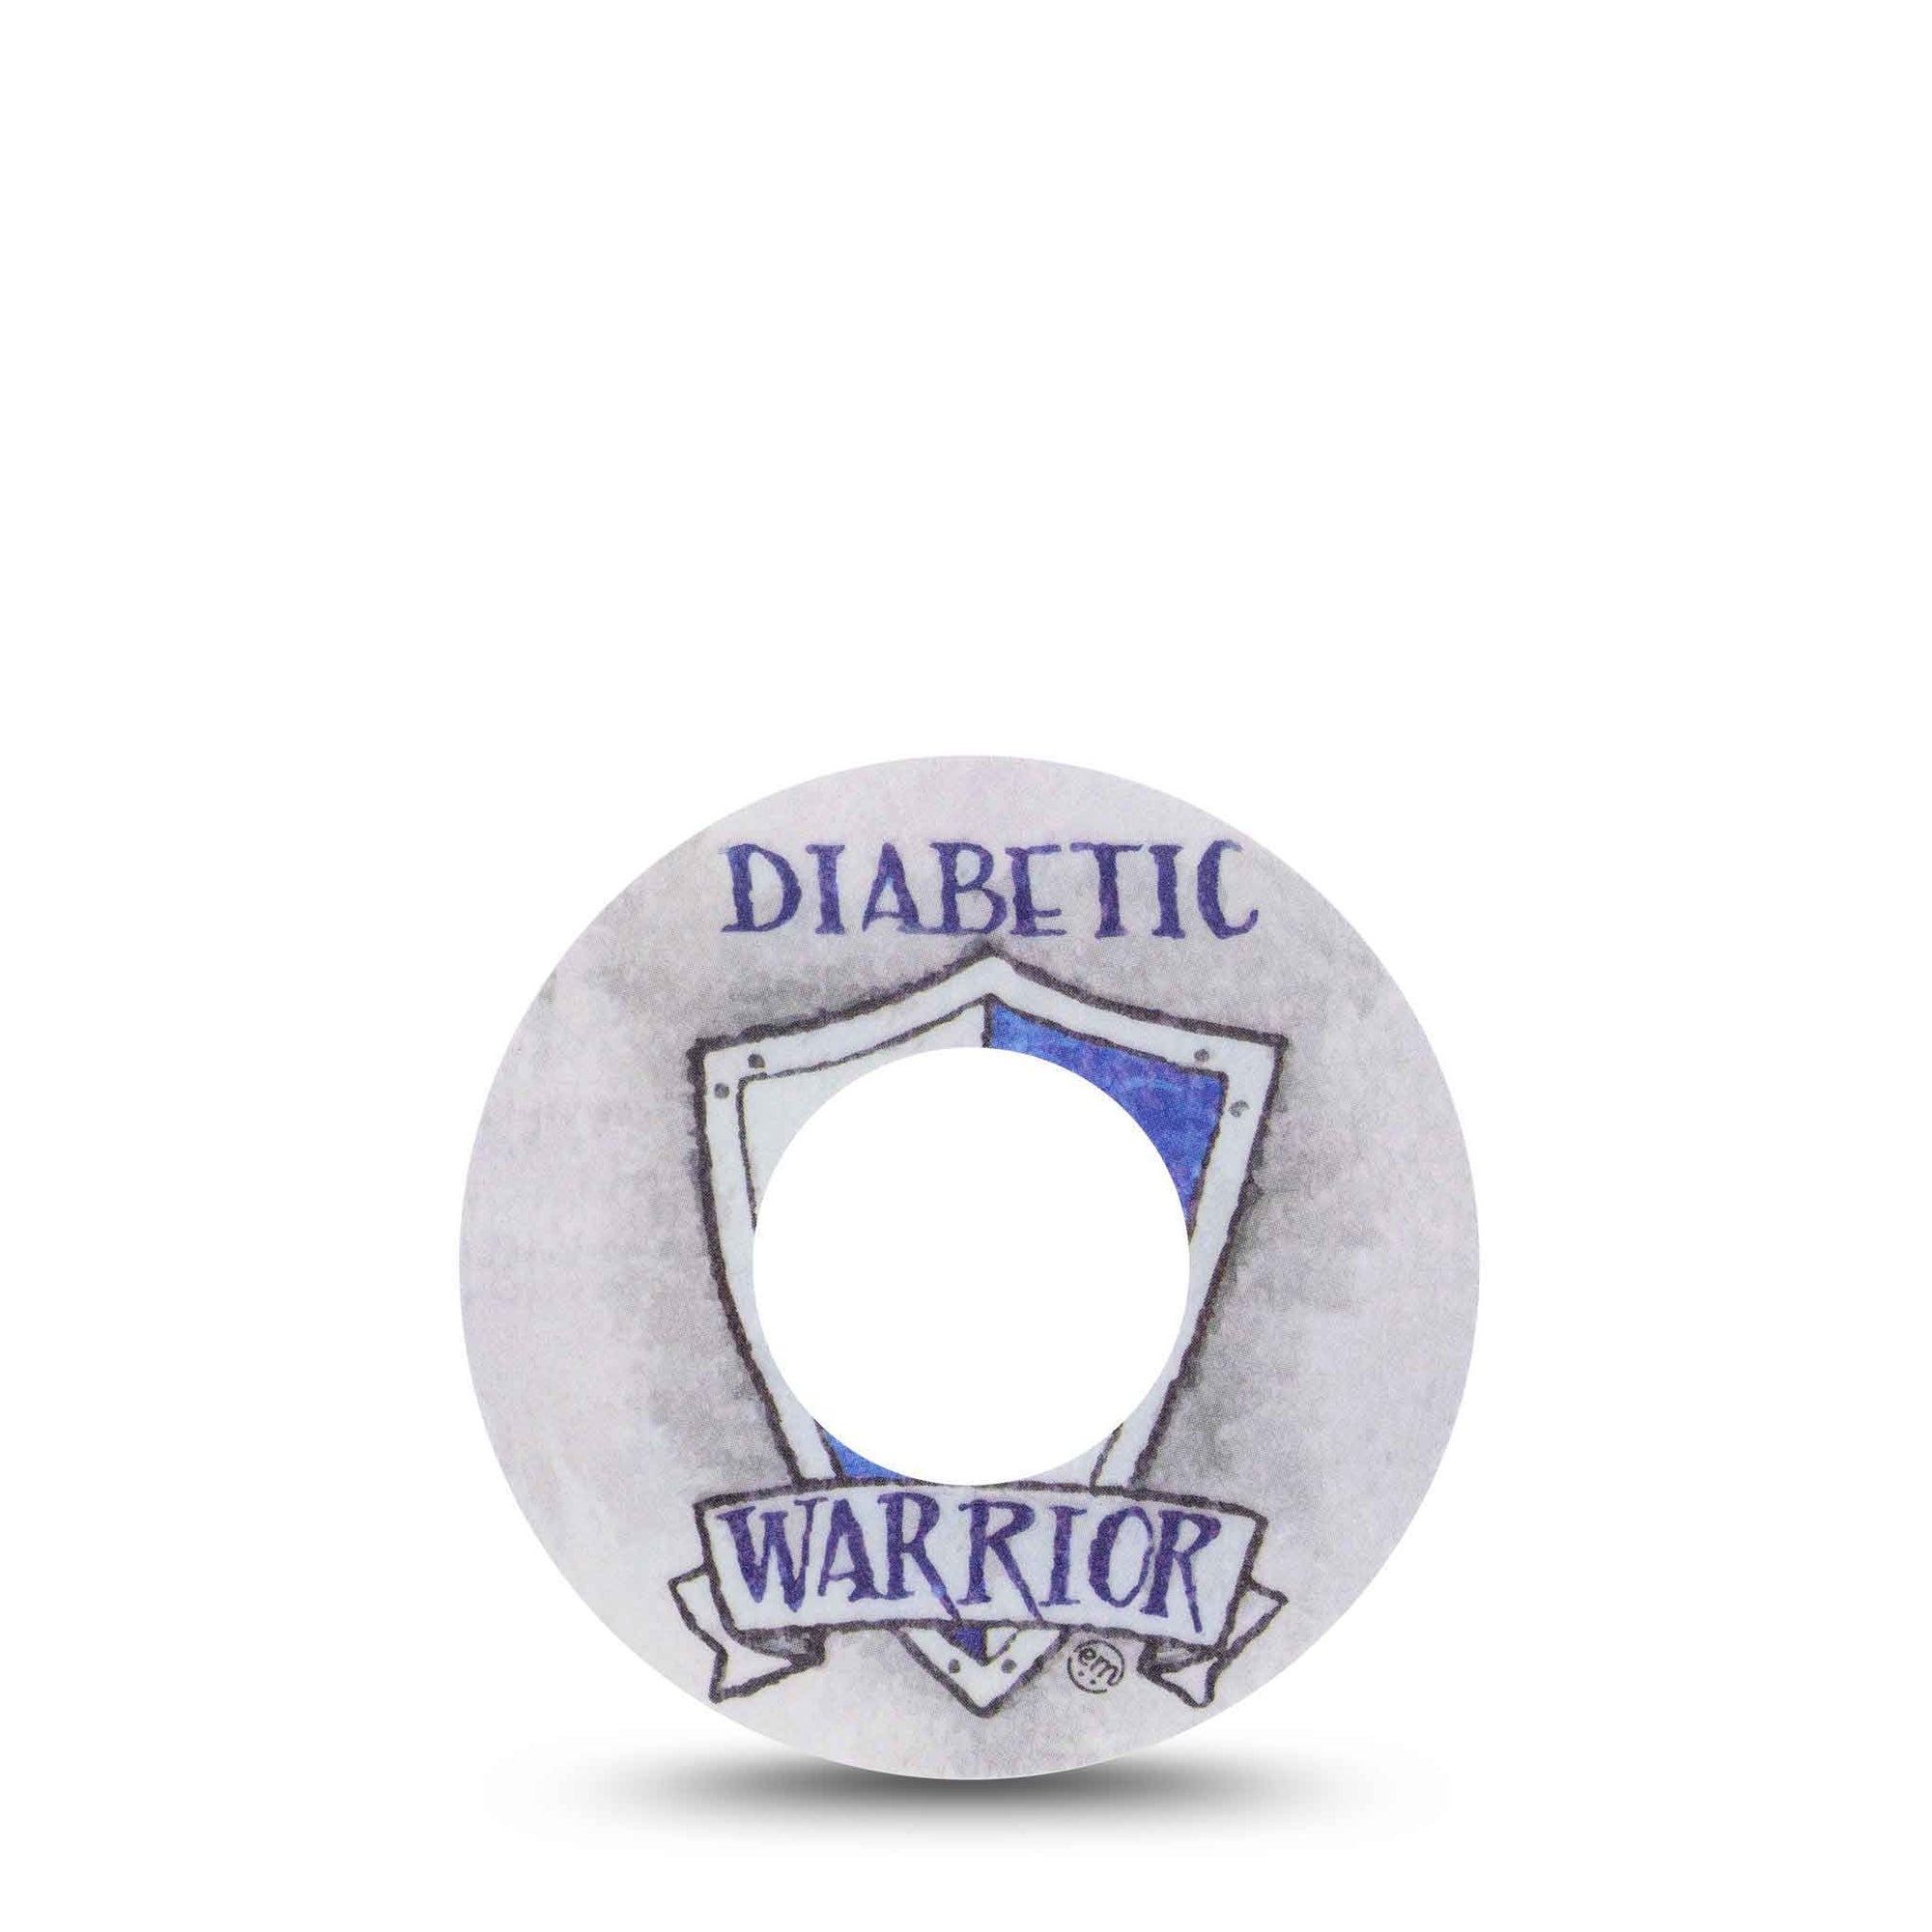 ExpressionMed Grey Diabetic Warrior Libre Tape